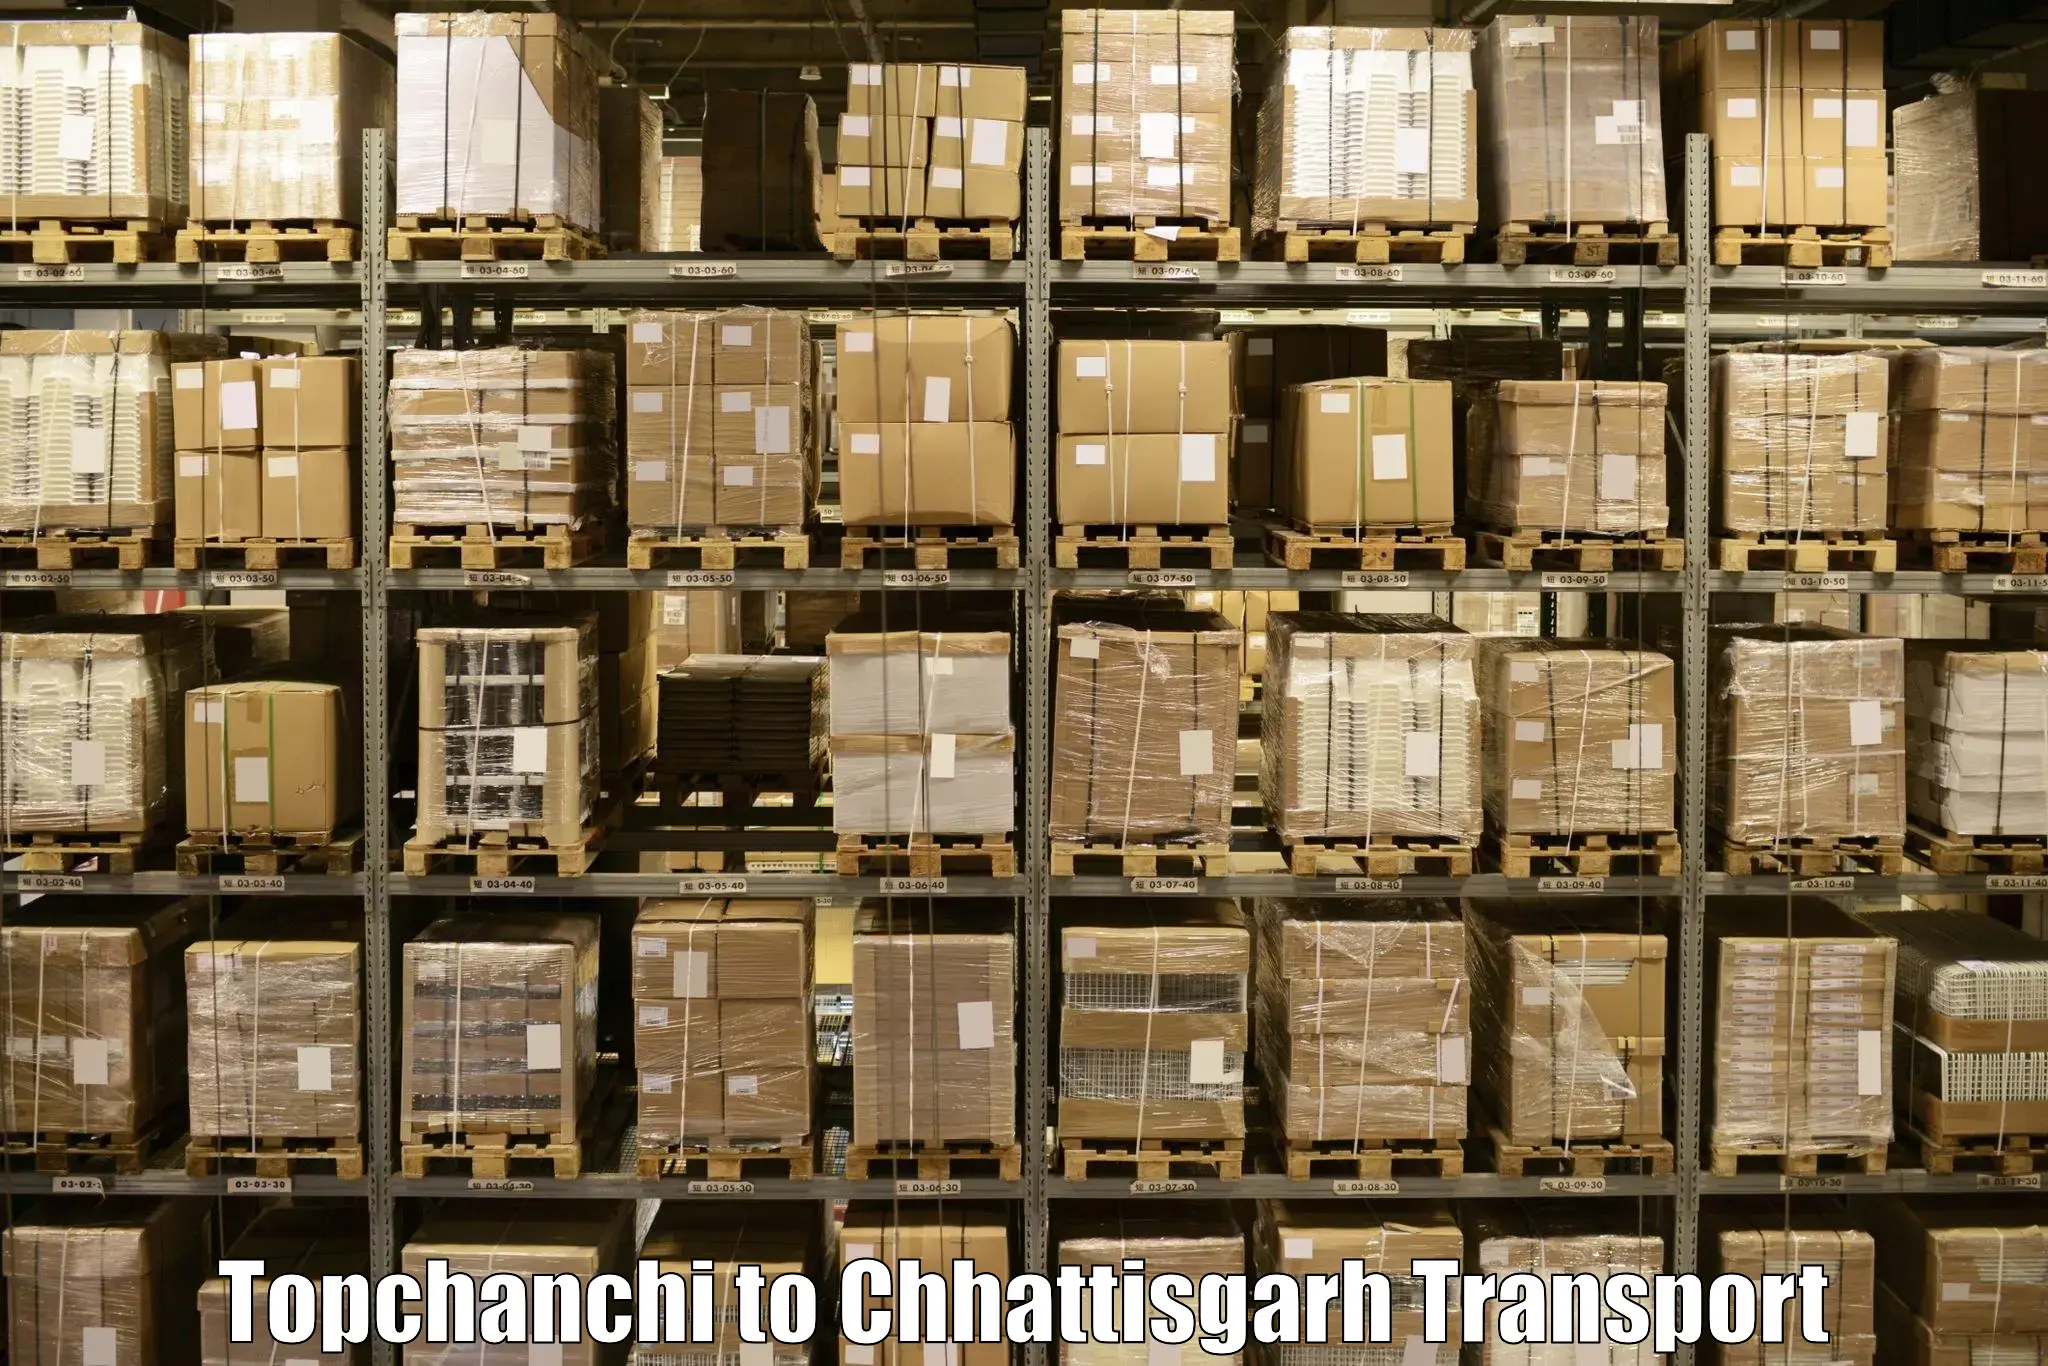 Container transport service Topchanchi to Berla